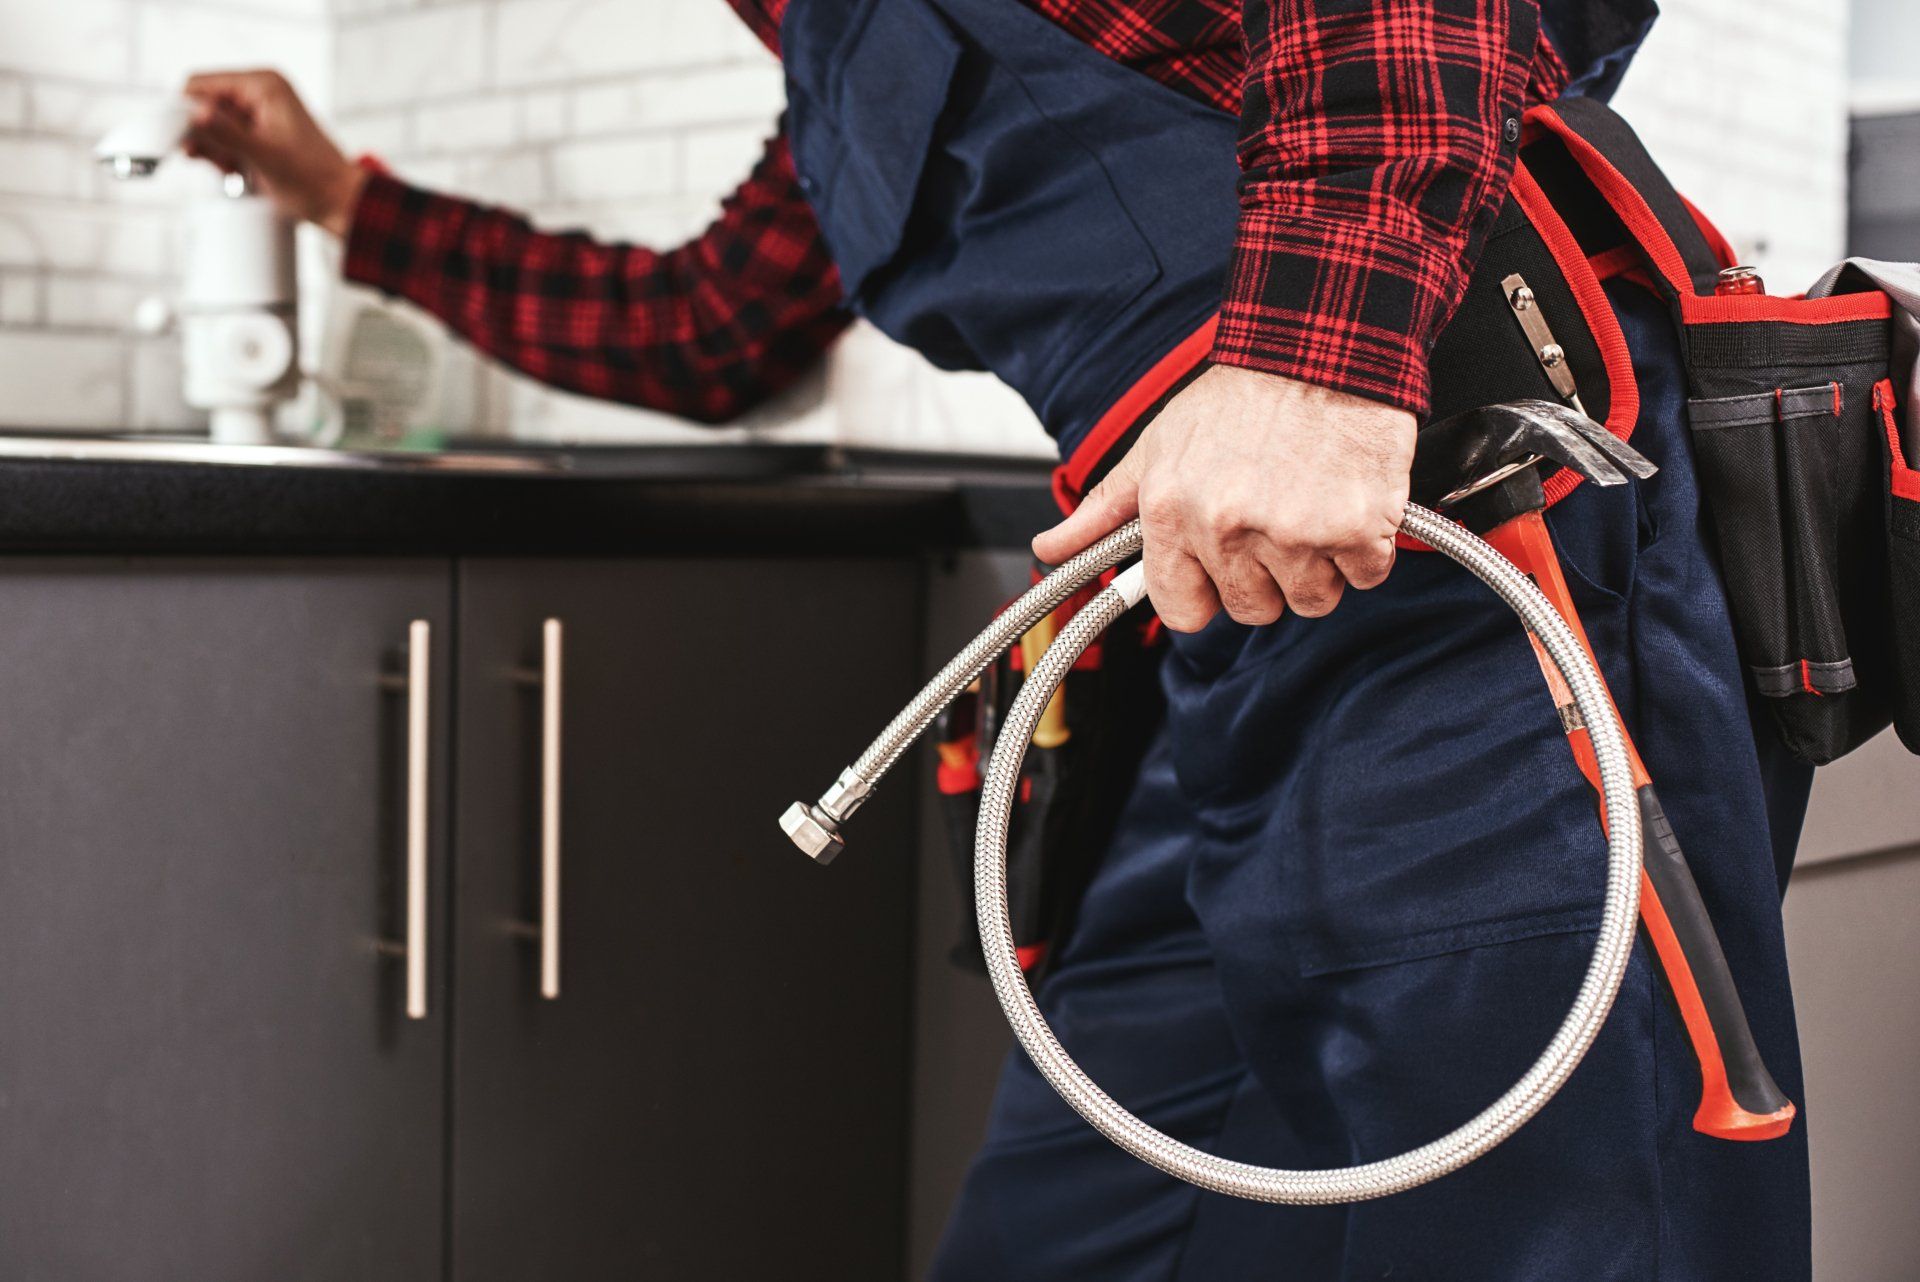 a plumber is holding a hose and a pair of pliers in a kitchen .